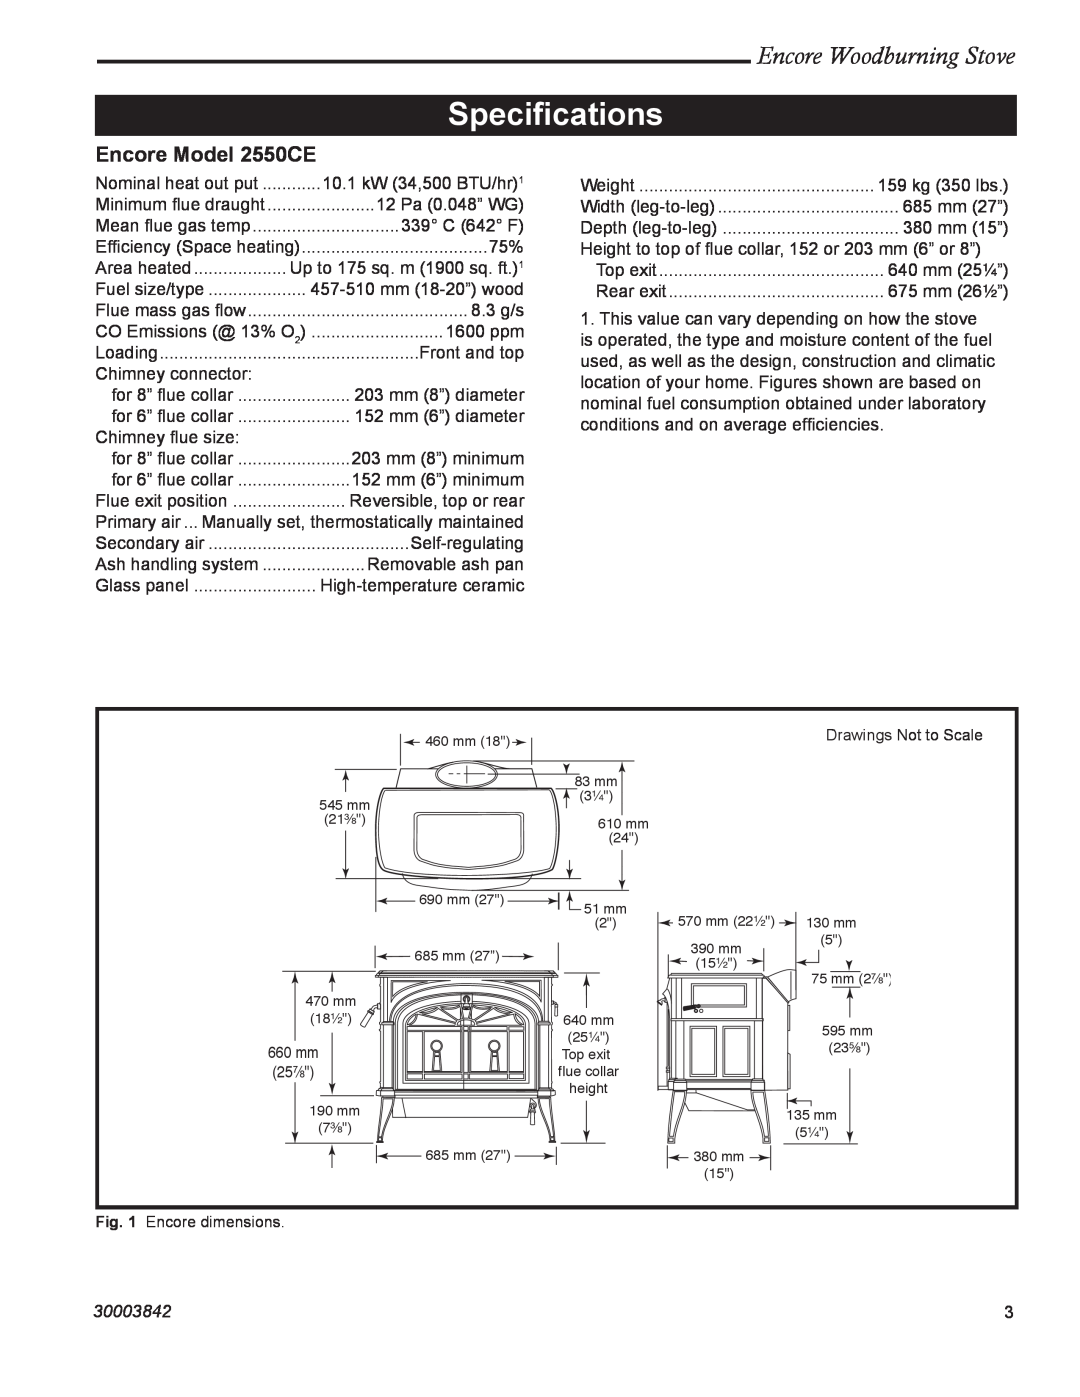 Vermont Casting installation instructions Speciﬁcations, Encore Model 2550CE, Encore Woodburning Stove, 30003842 